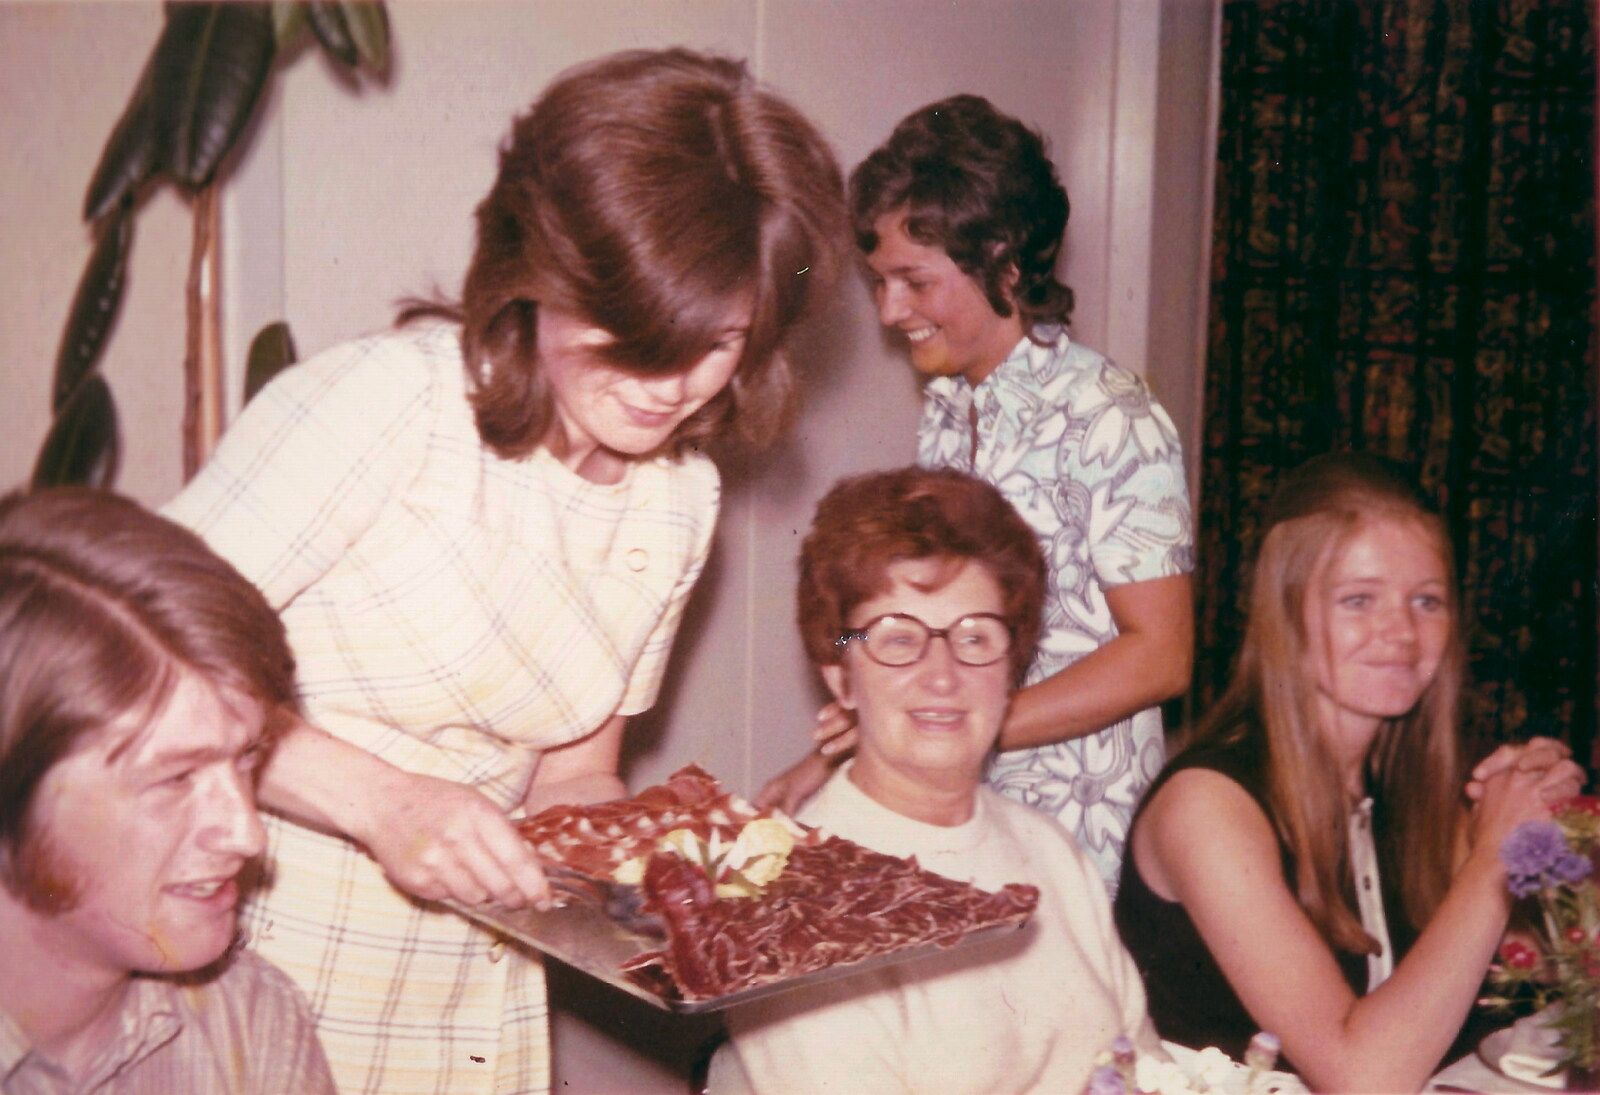 Family History: The 1960s - 24th January 2020: Judith hands out some party food